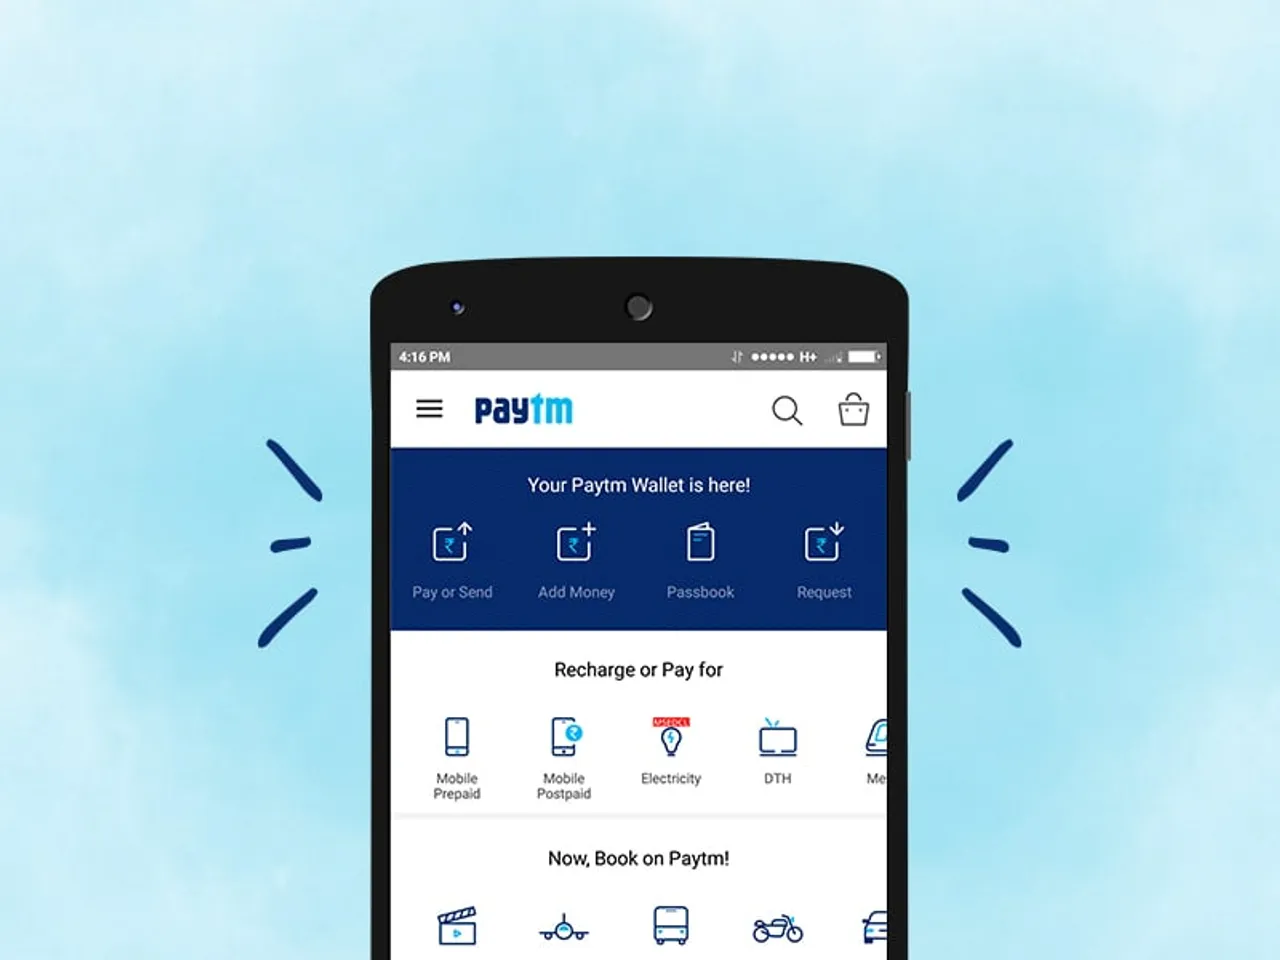 Now secure your Paytm Wallet with Paytm’s new App Password feature